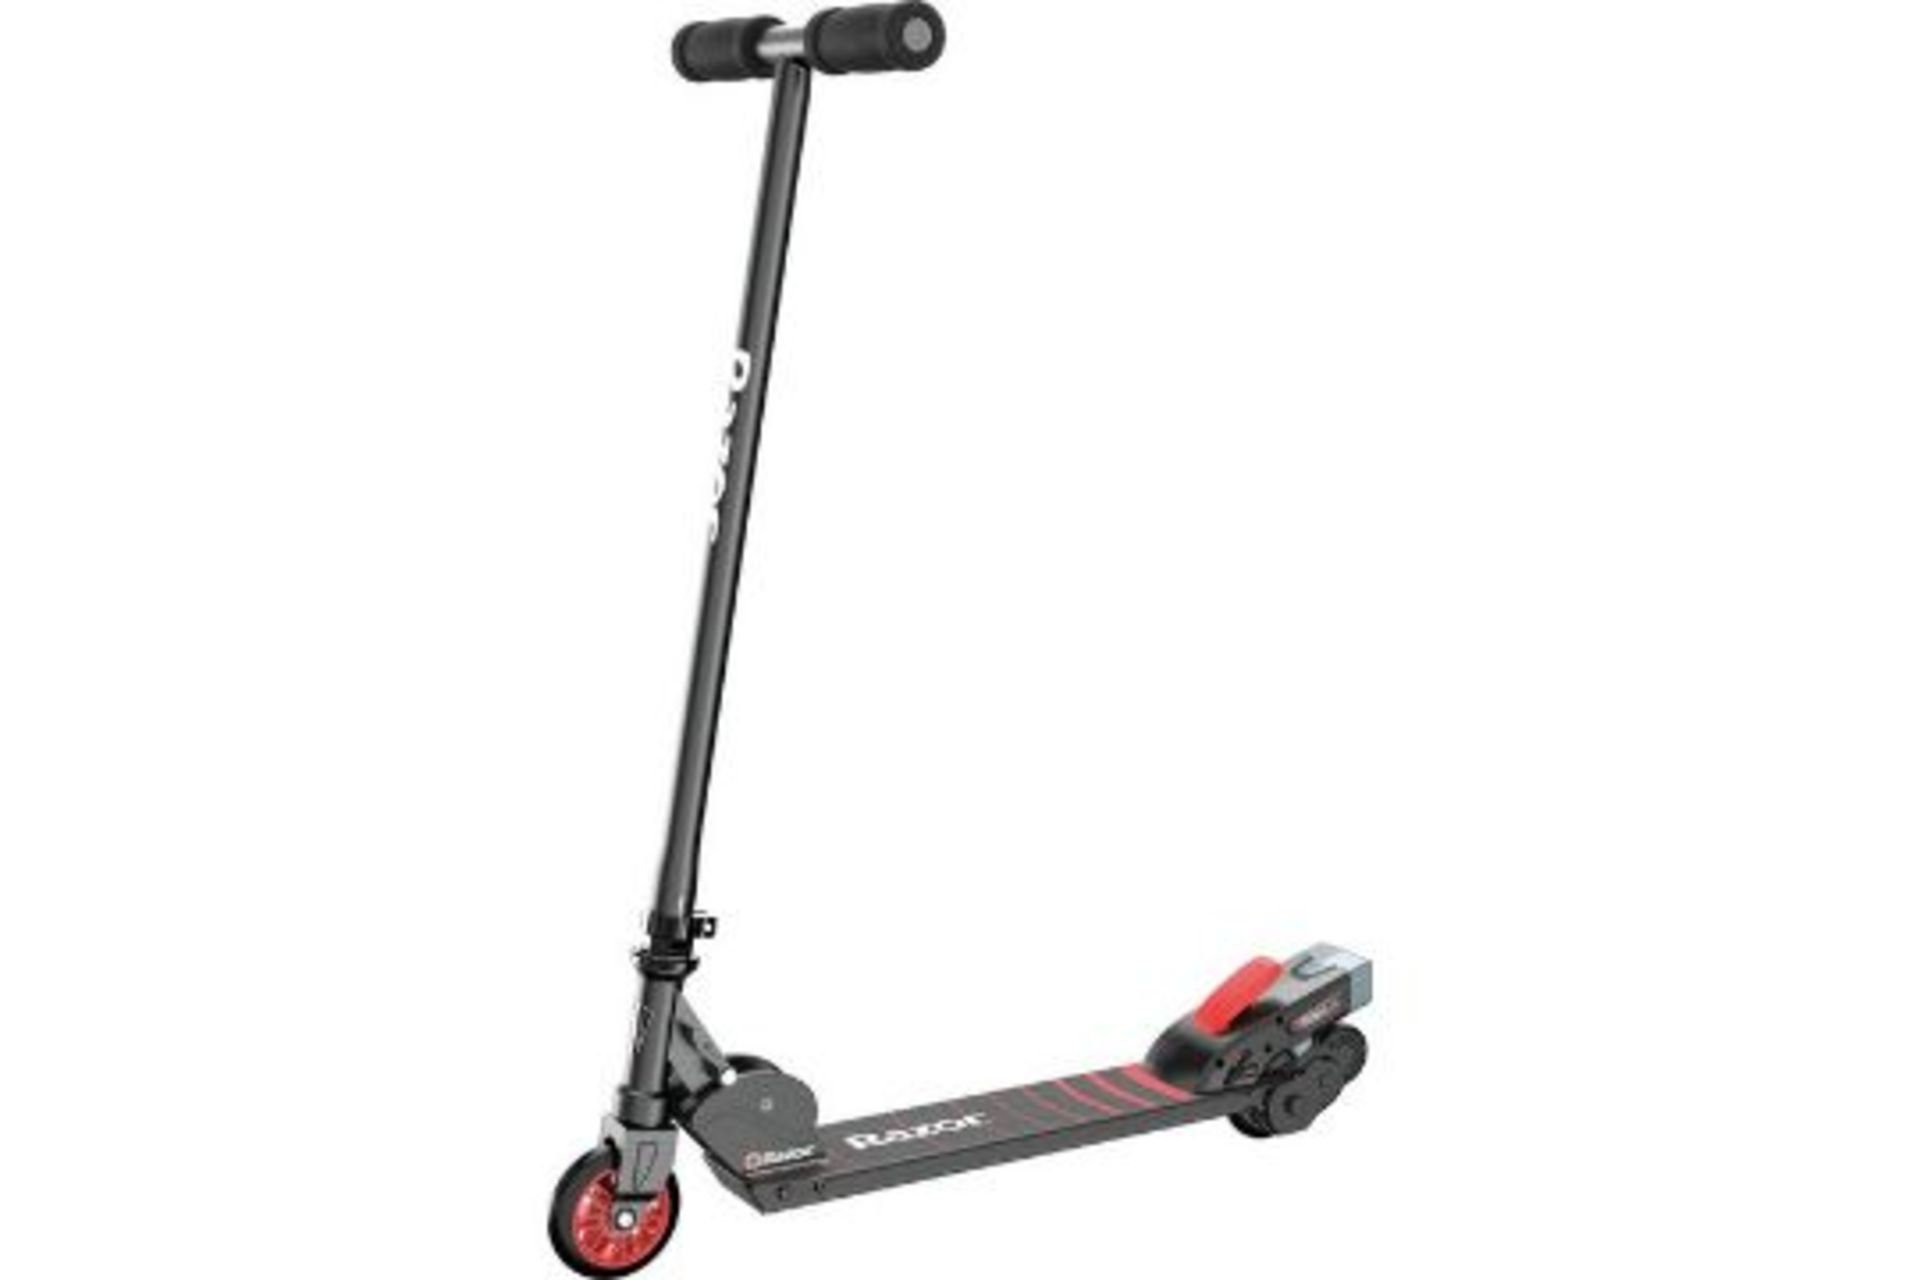 (ex92) Razor Turbo A Black Label Electric Scooter RRP £175.00. Simply step on and kick off to